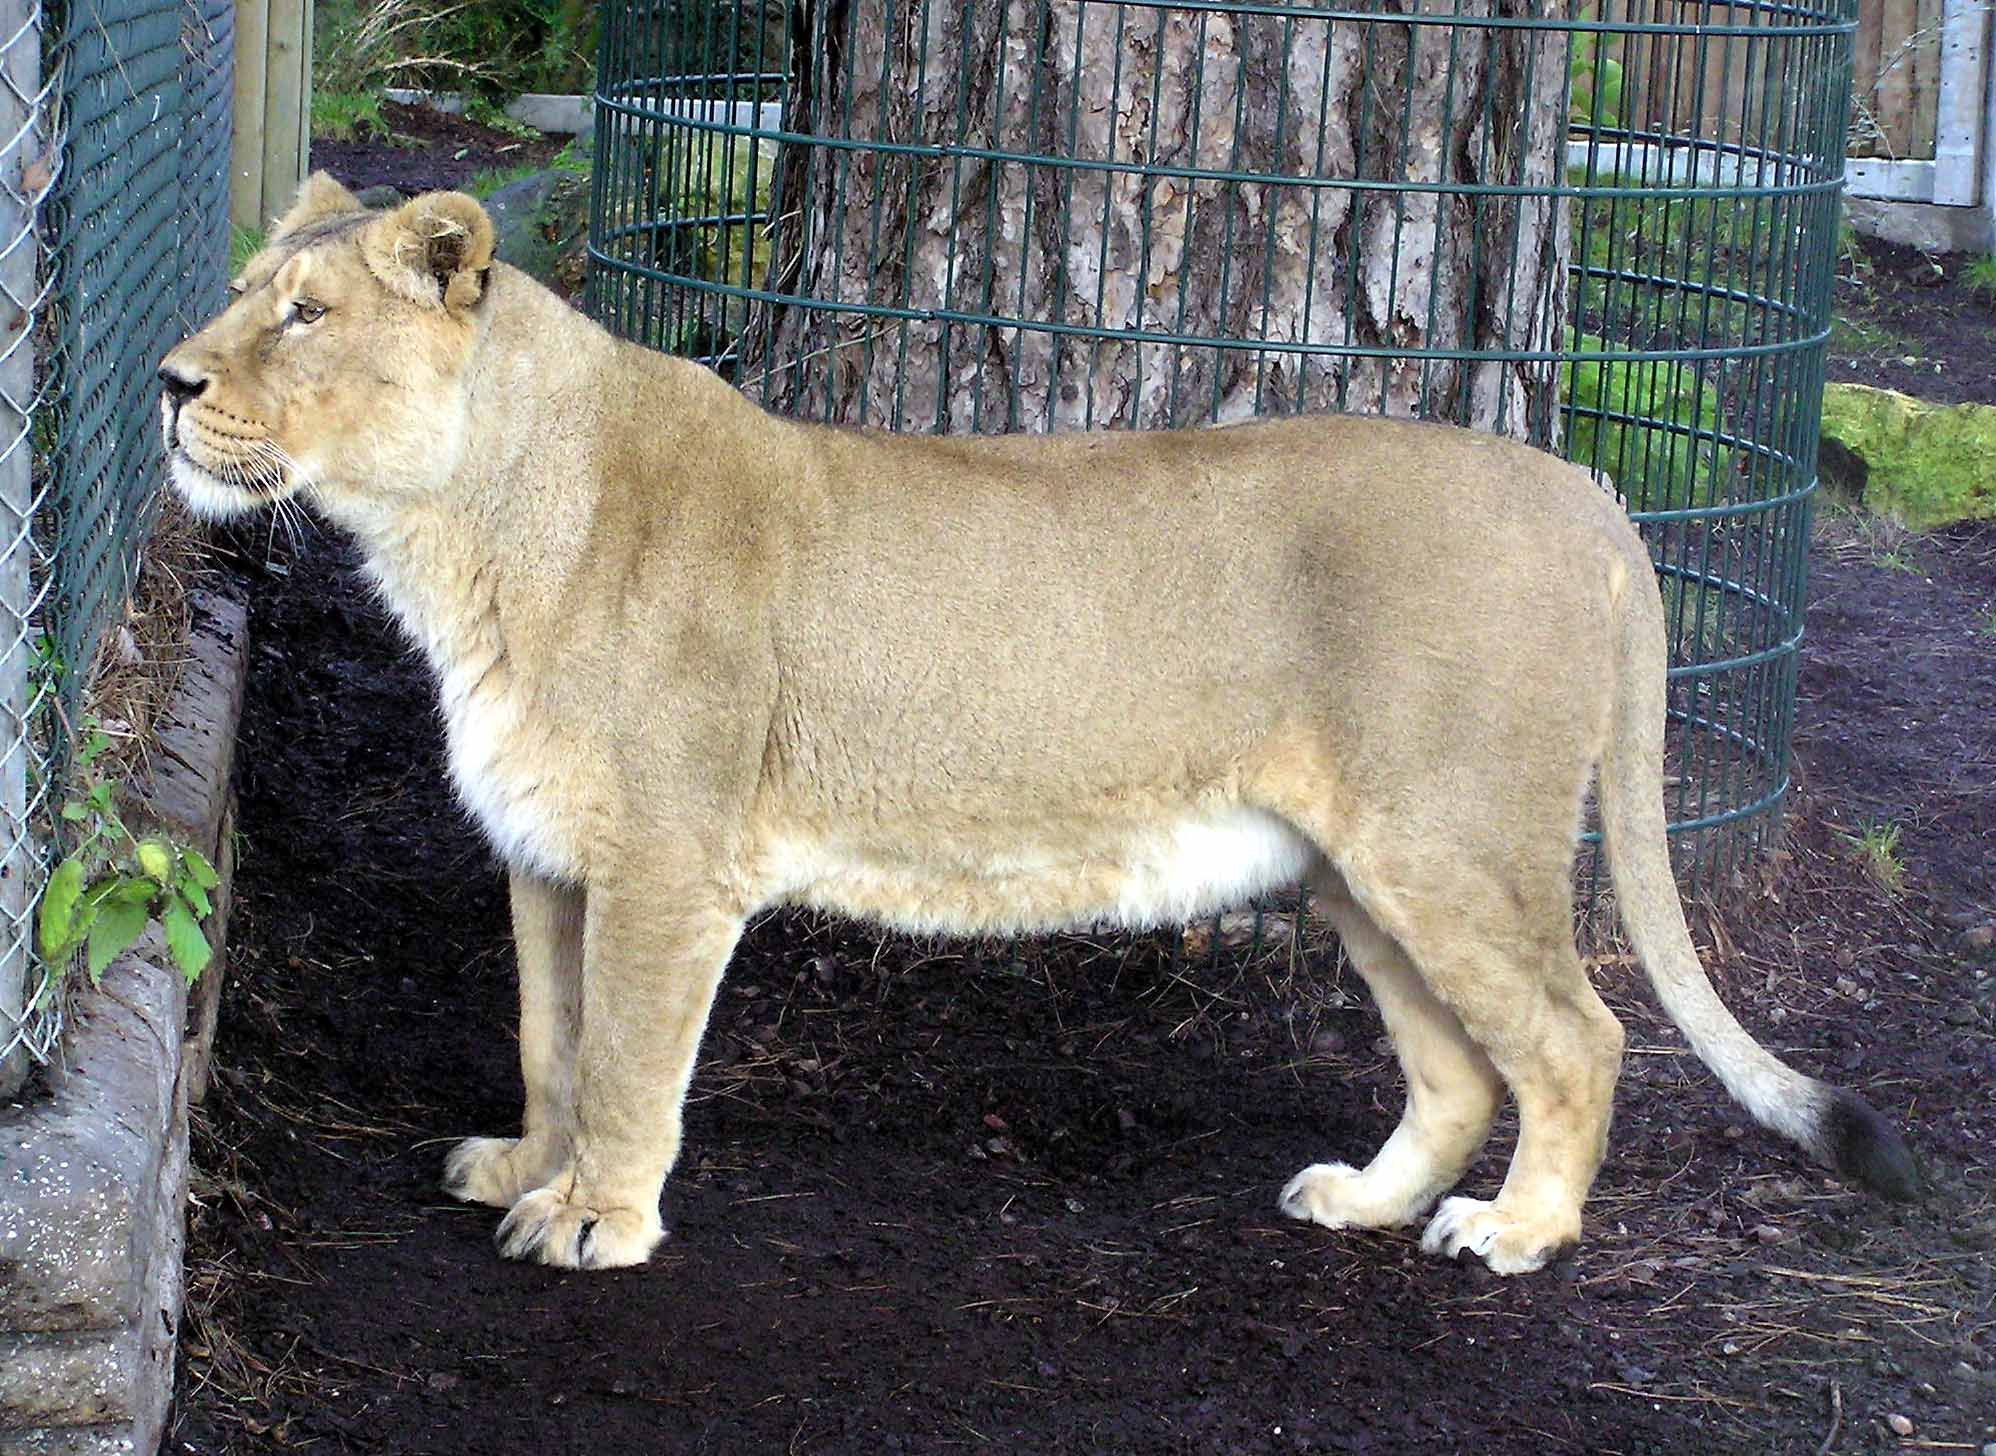 Image of Asiatic Lion